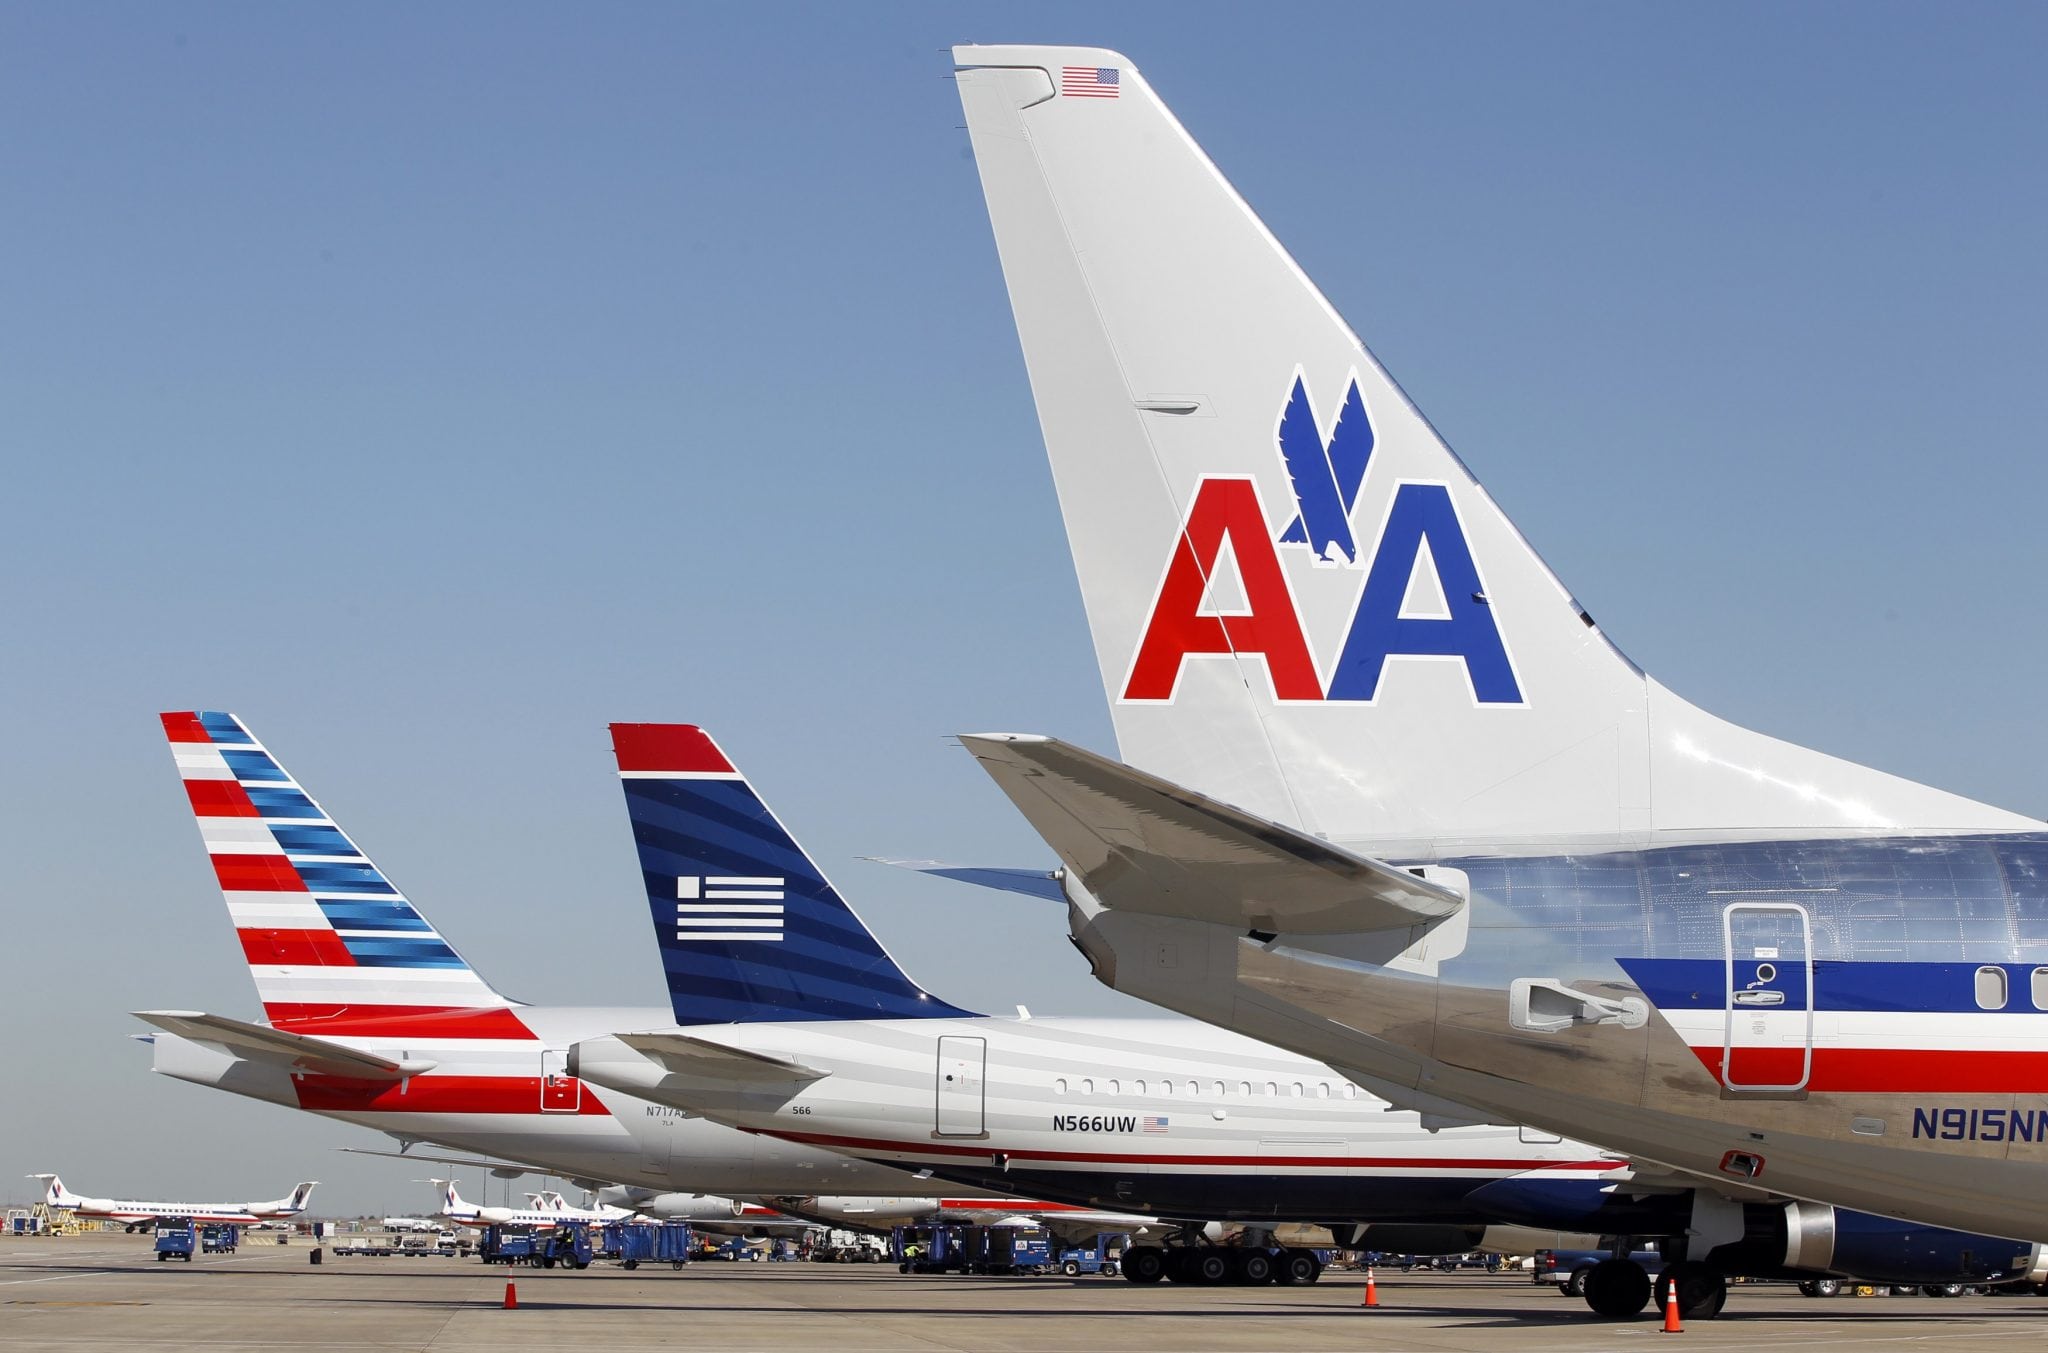 The tail sections of a newly designed American Airlines aircraft (L), a US Airways aircraft (C) and a traditional American Airlines aircraft are lined up at Dallas-Ft Worth International Airport February 14, 2013.